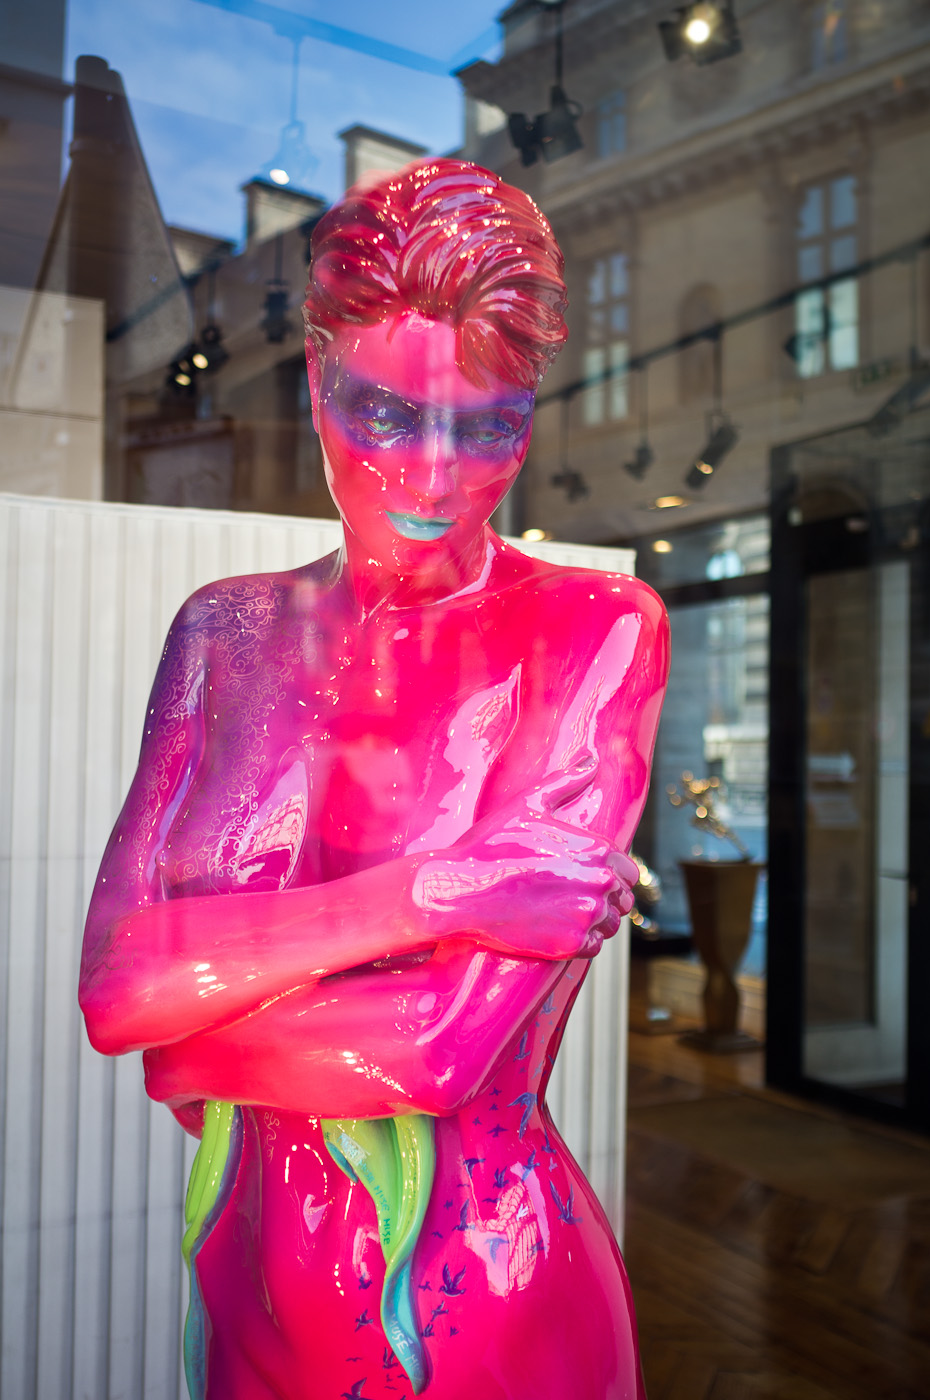 A pink modern art statue of a nake lady in a gallery next to the Louvre, Paris. Sony NEX-5n & Zeiss ZM Biogon 25mm f/2.8